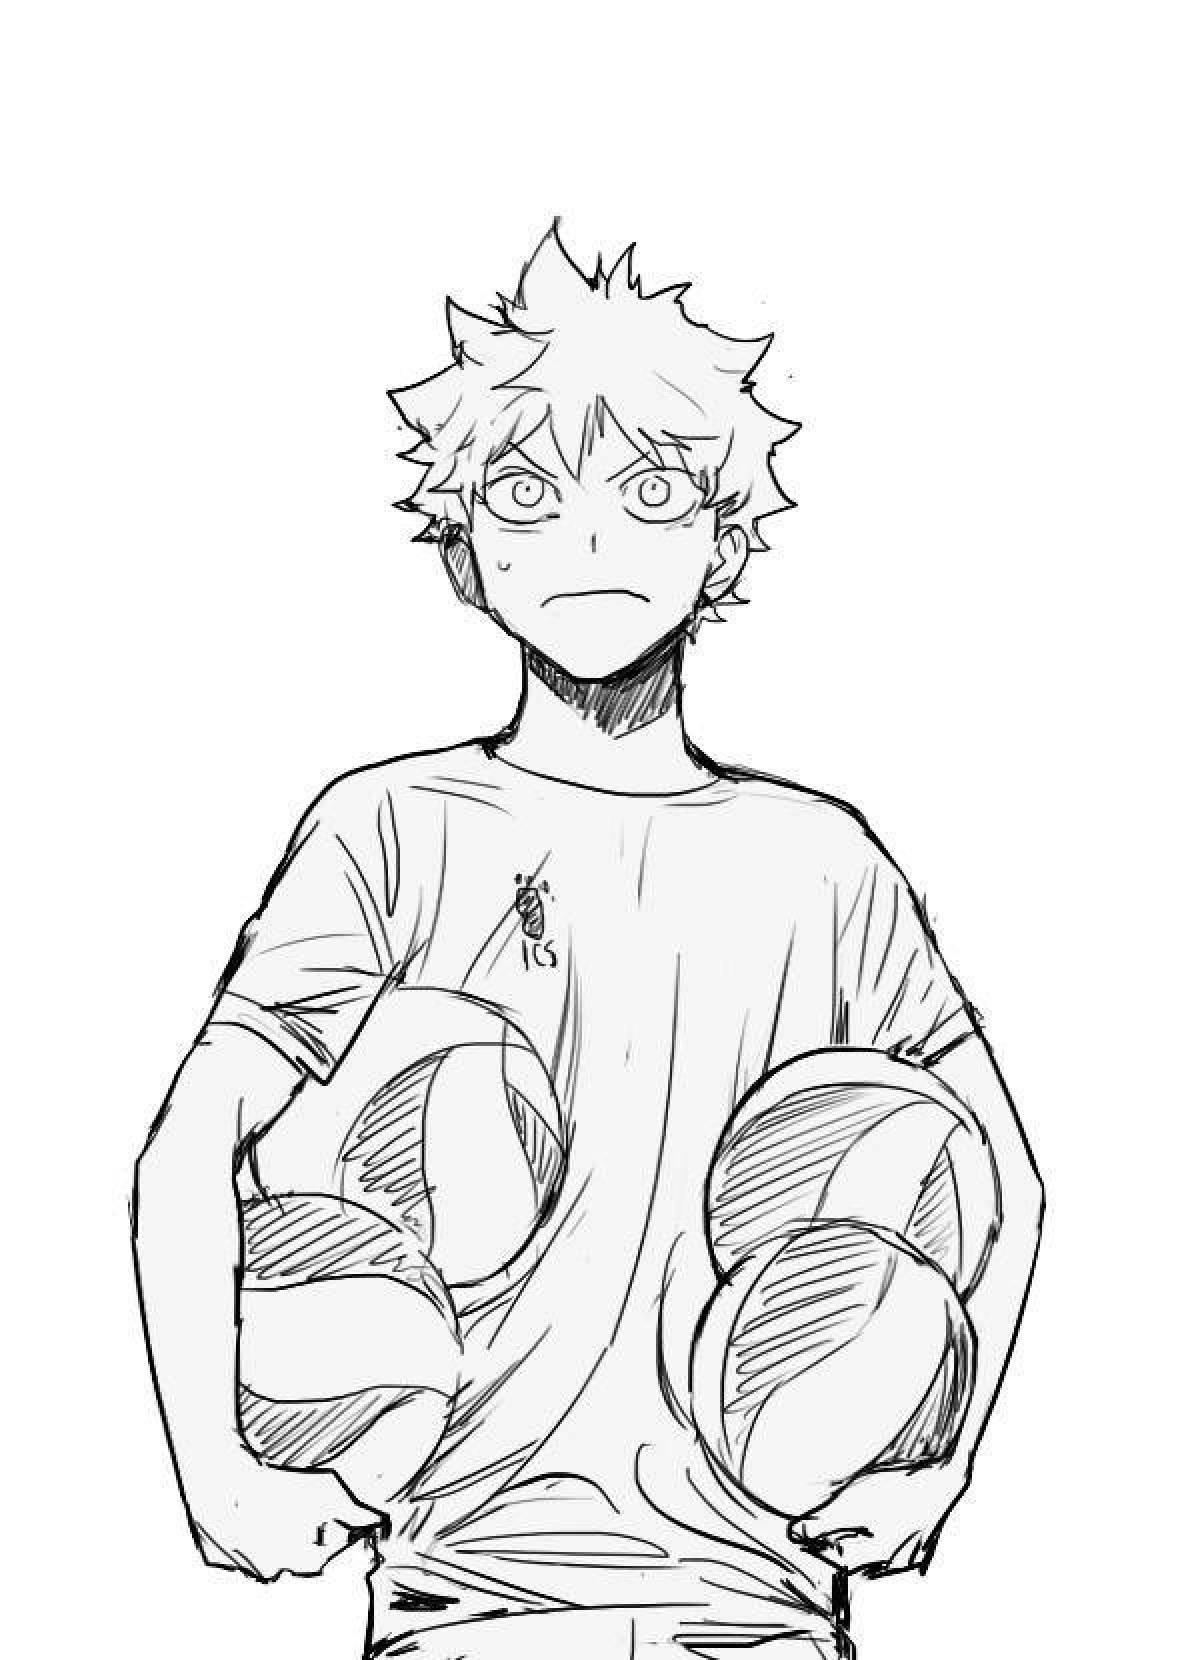 Hinata shoes awesome coloring page